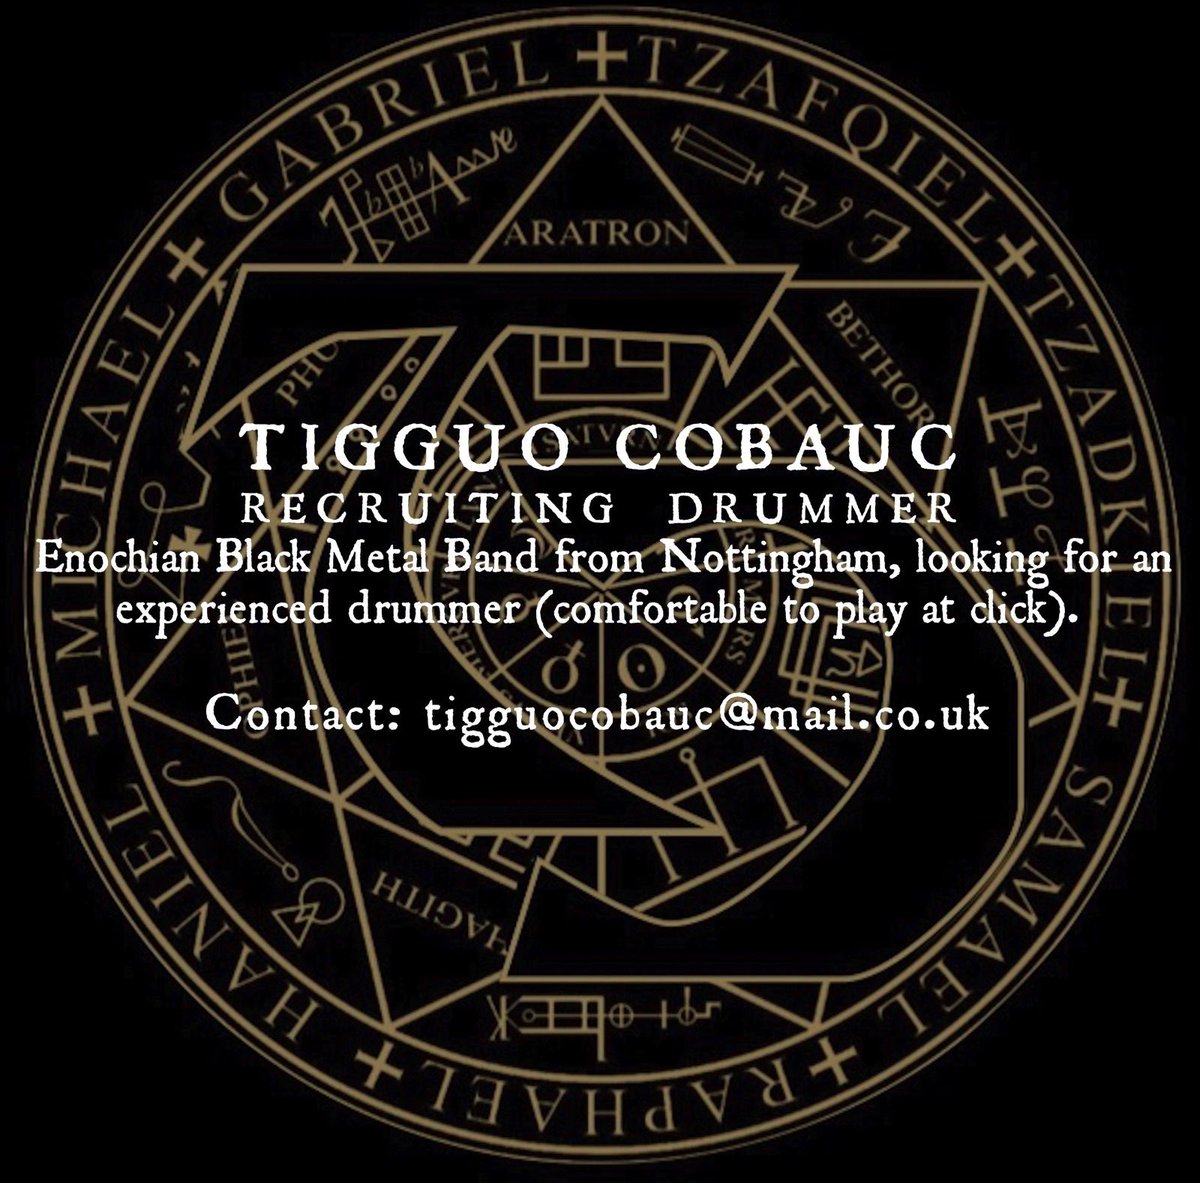 TIGGUO COBAUC
RECRUITING  DRUMMER
 Enochian Black Metal Band from Nottingham, looking for an experienced drummer (comfortable to play at click). 

Contact: tigguocobauc@mail.co.uk  #drummer #drummerlife #metaldrummer #nottingham #midlands